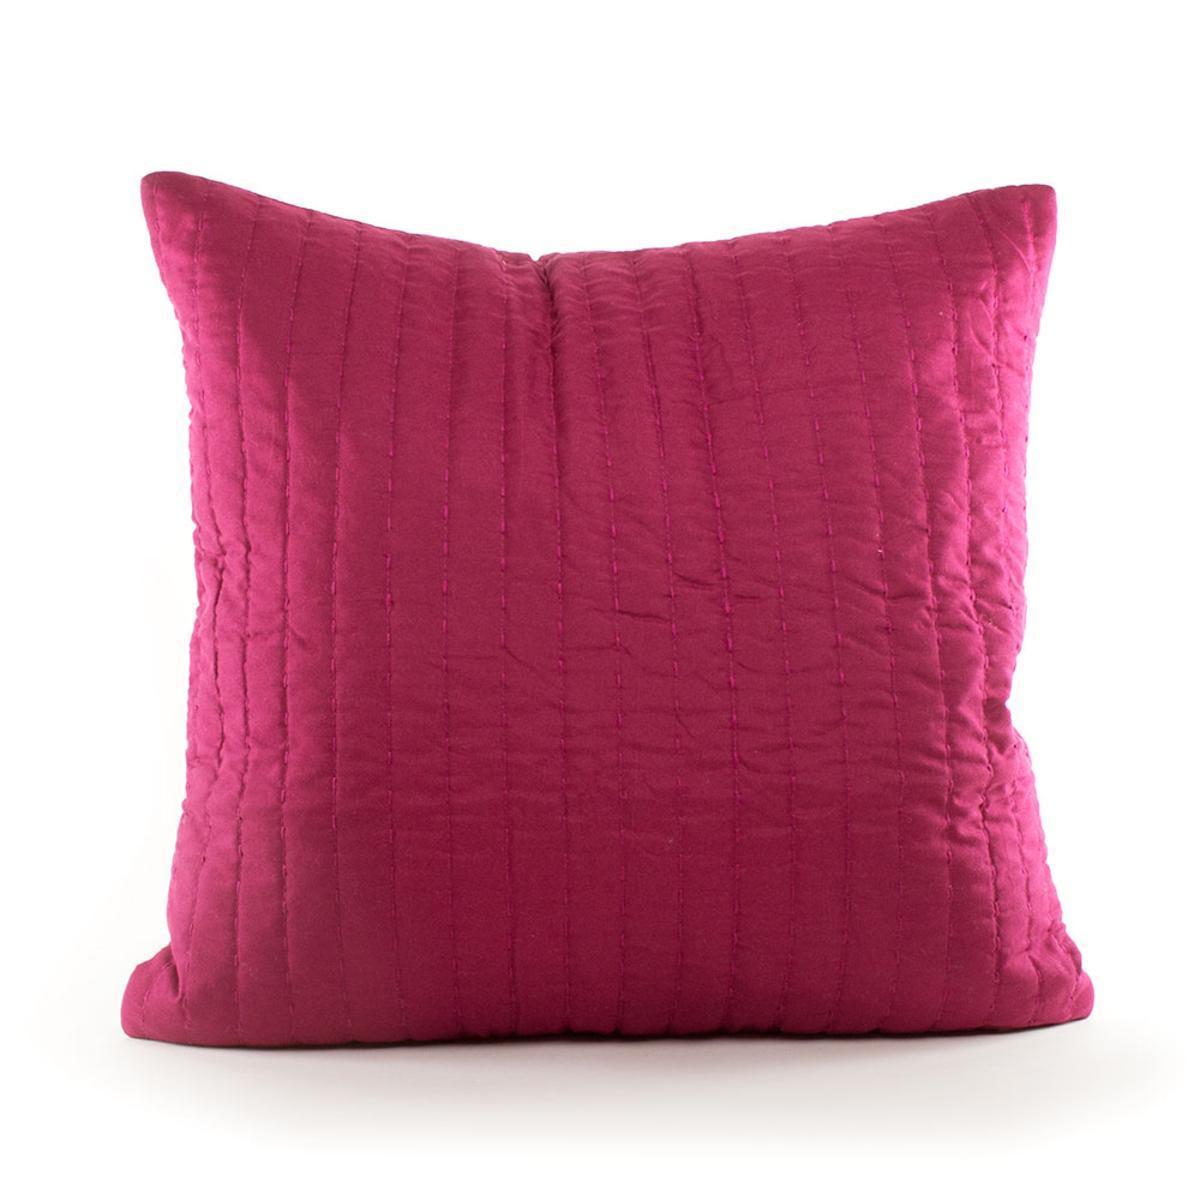 COUSSIN LILI CASSIS 45X45